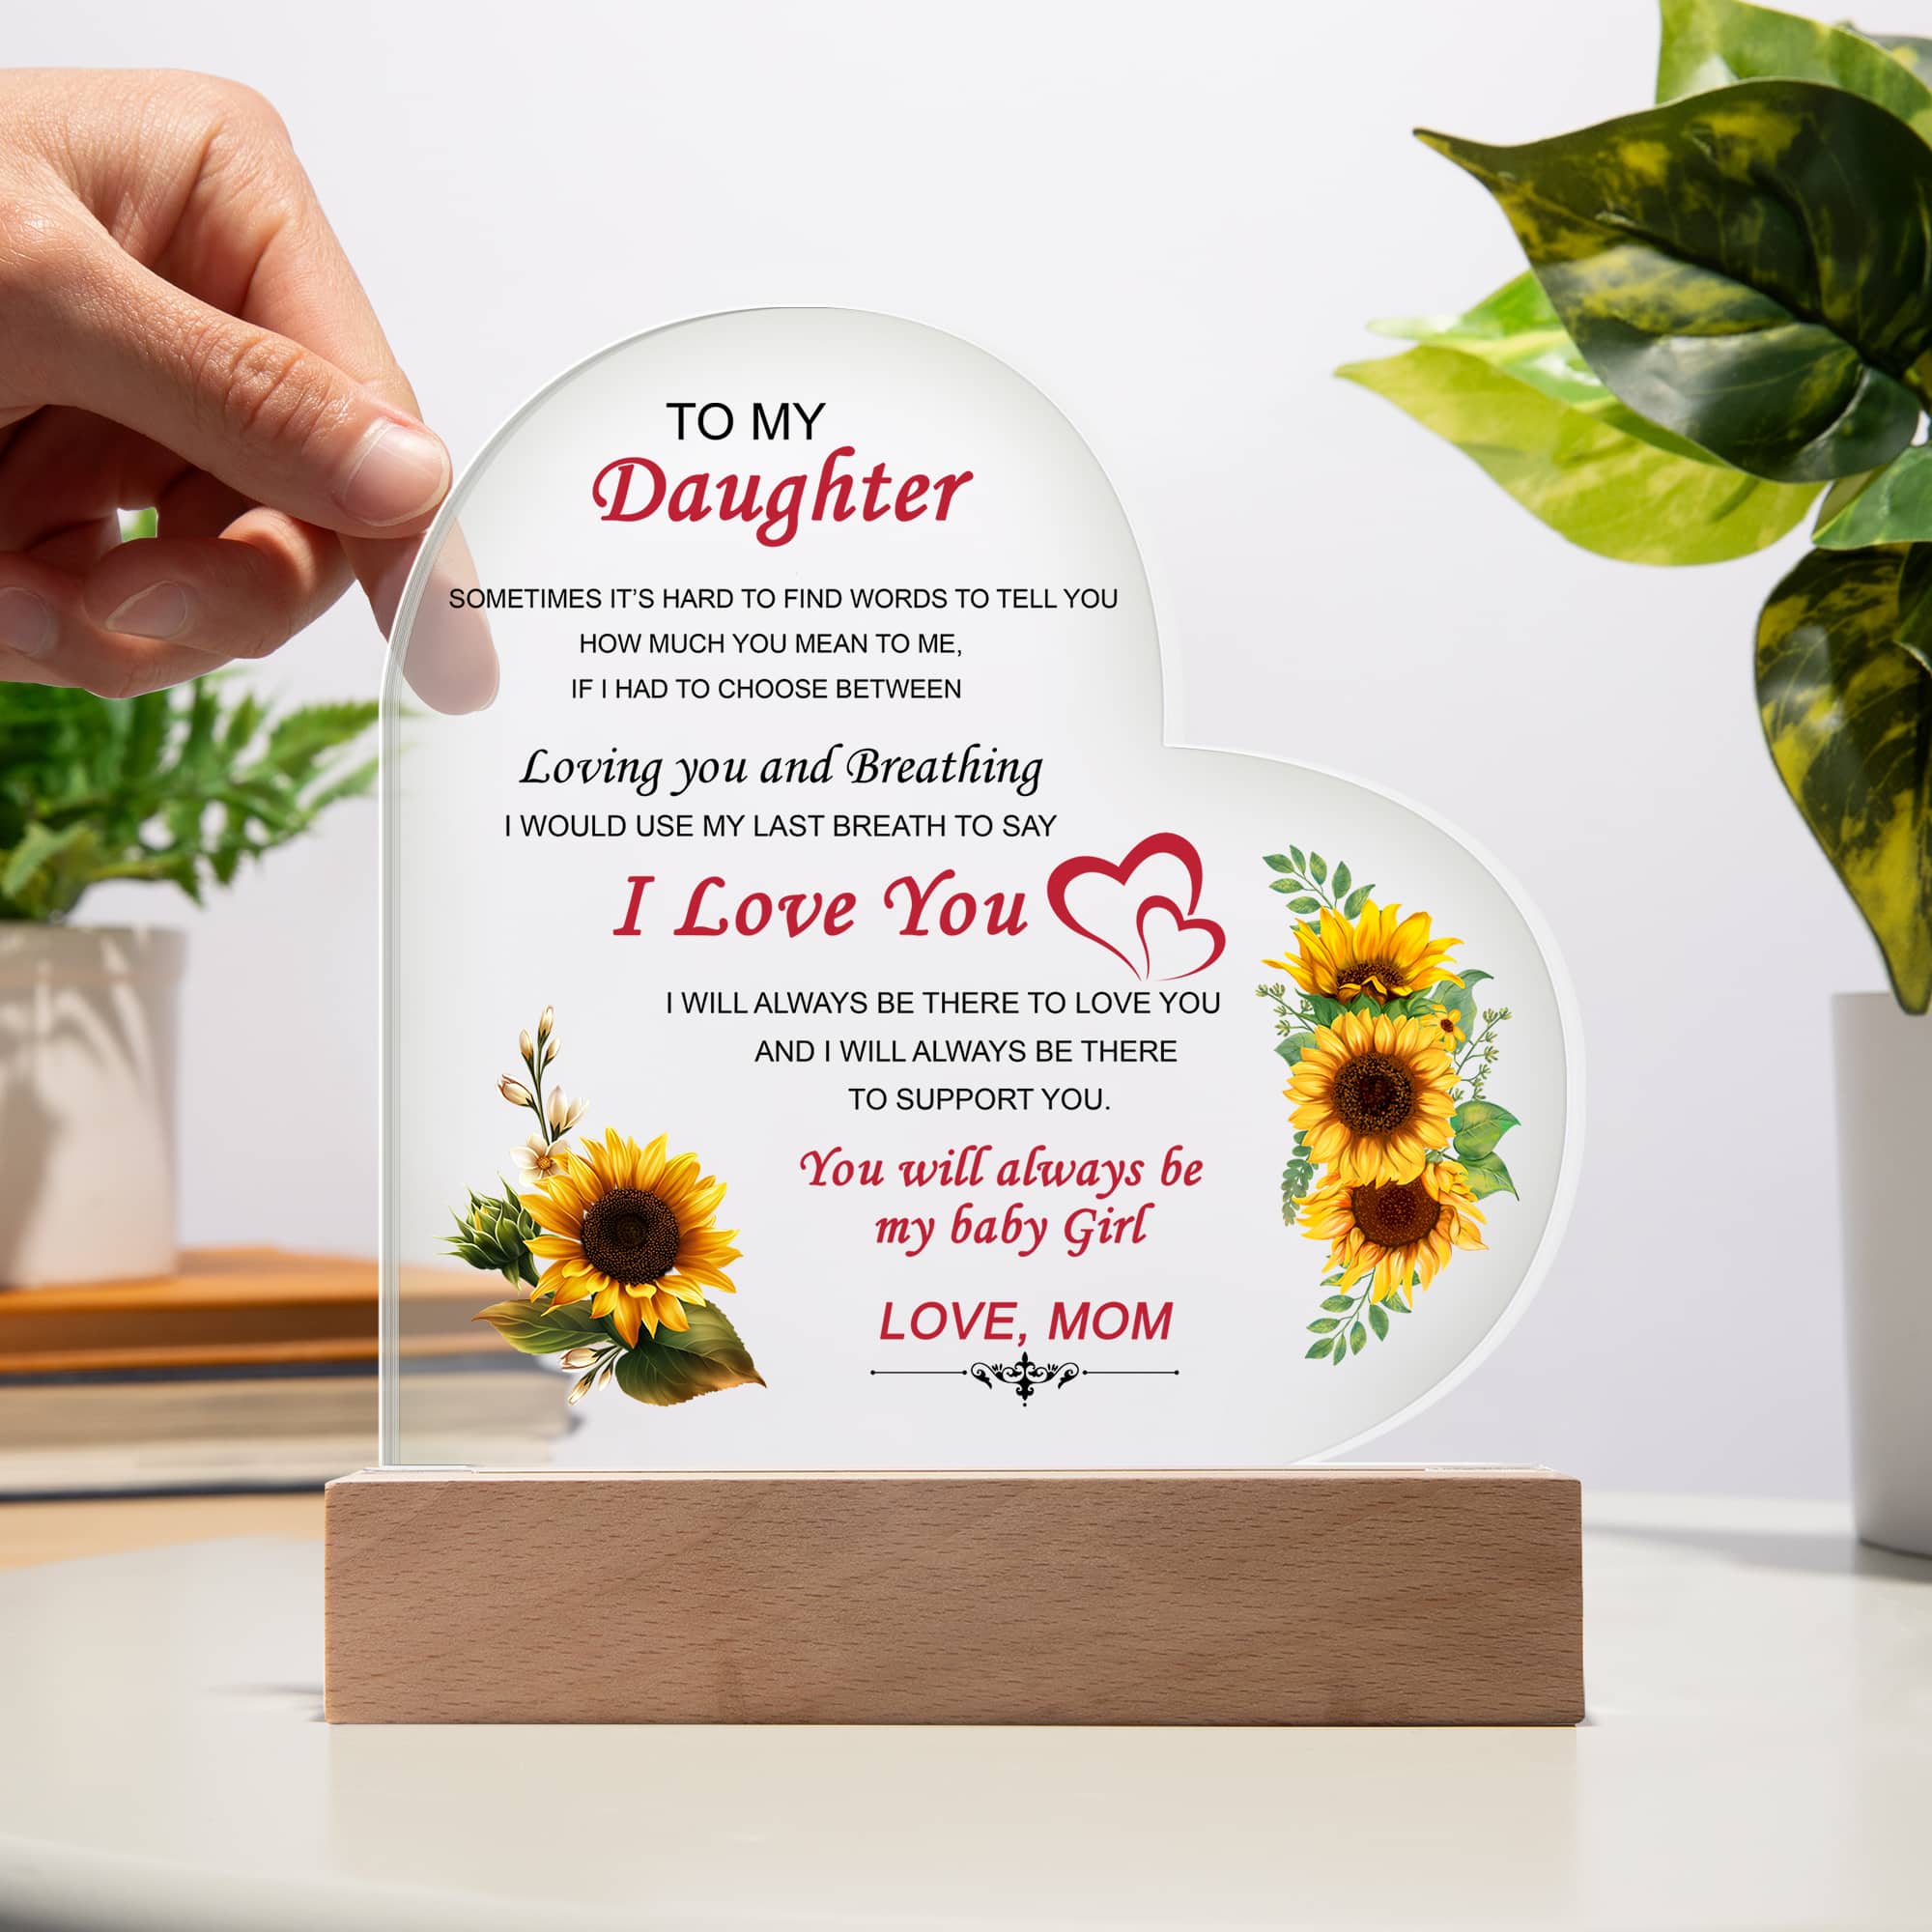 Acrylic Heart Plaque, Gift From Mom To Daughter With Lovely Message - FavoJewelry